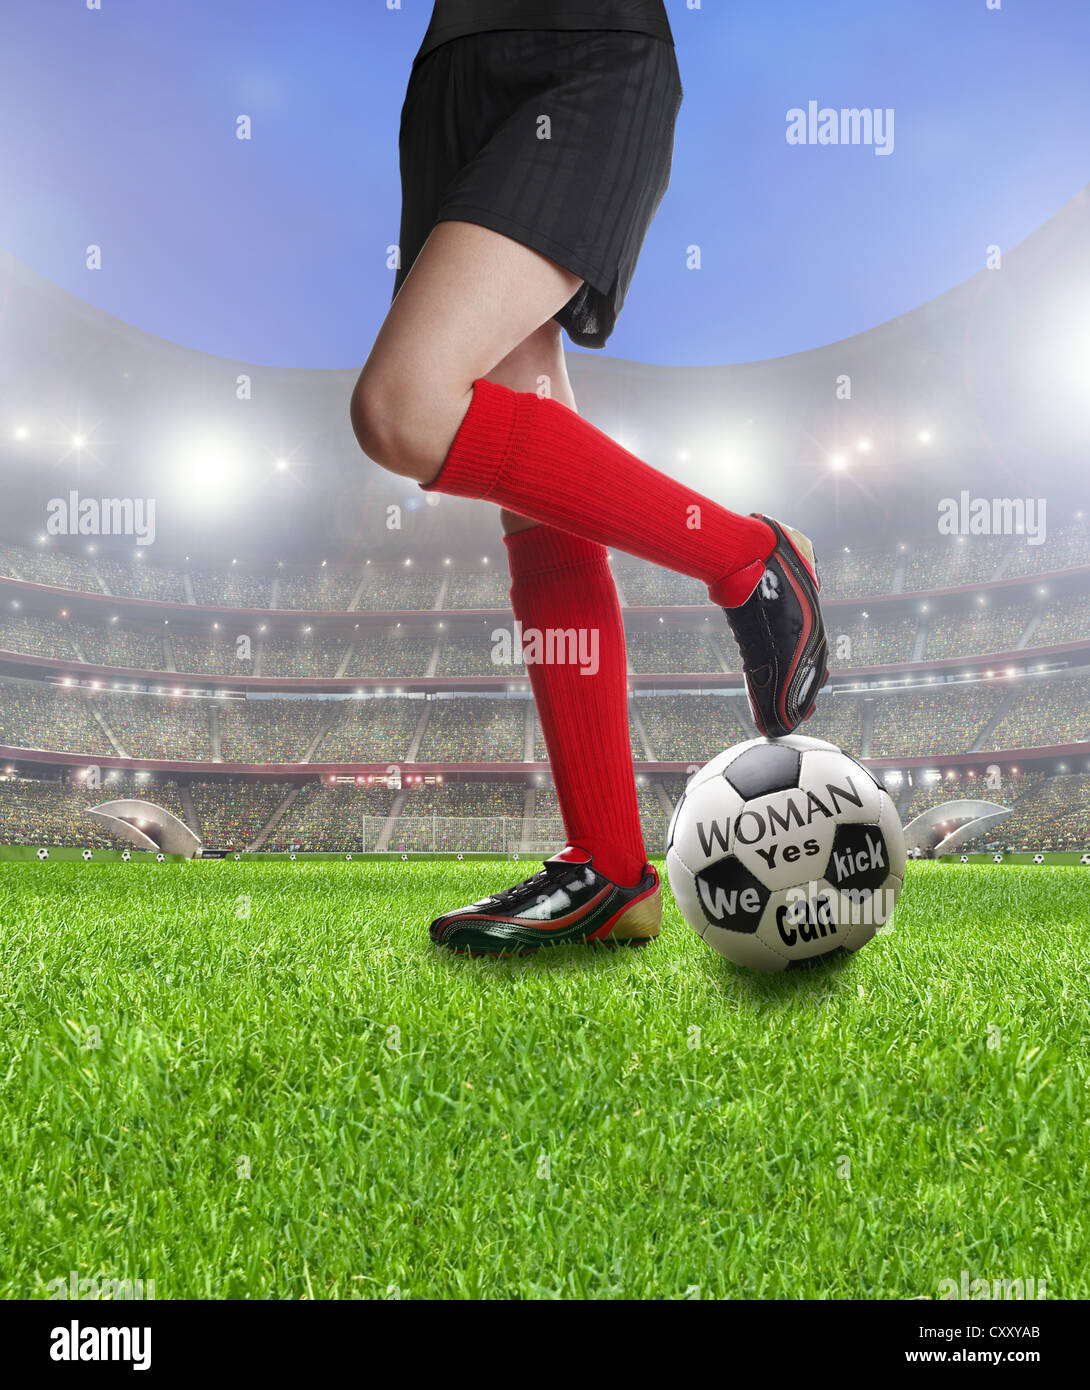 Legs of a female soccer player on a soccer ball labelled, Woman Yes we can kick, at a football stadium, illustration Stock Photo